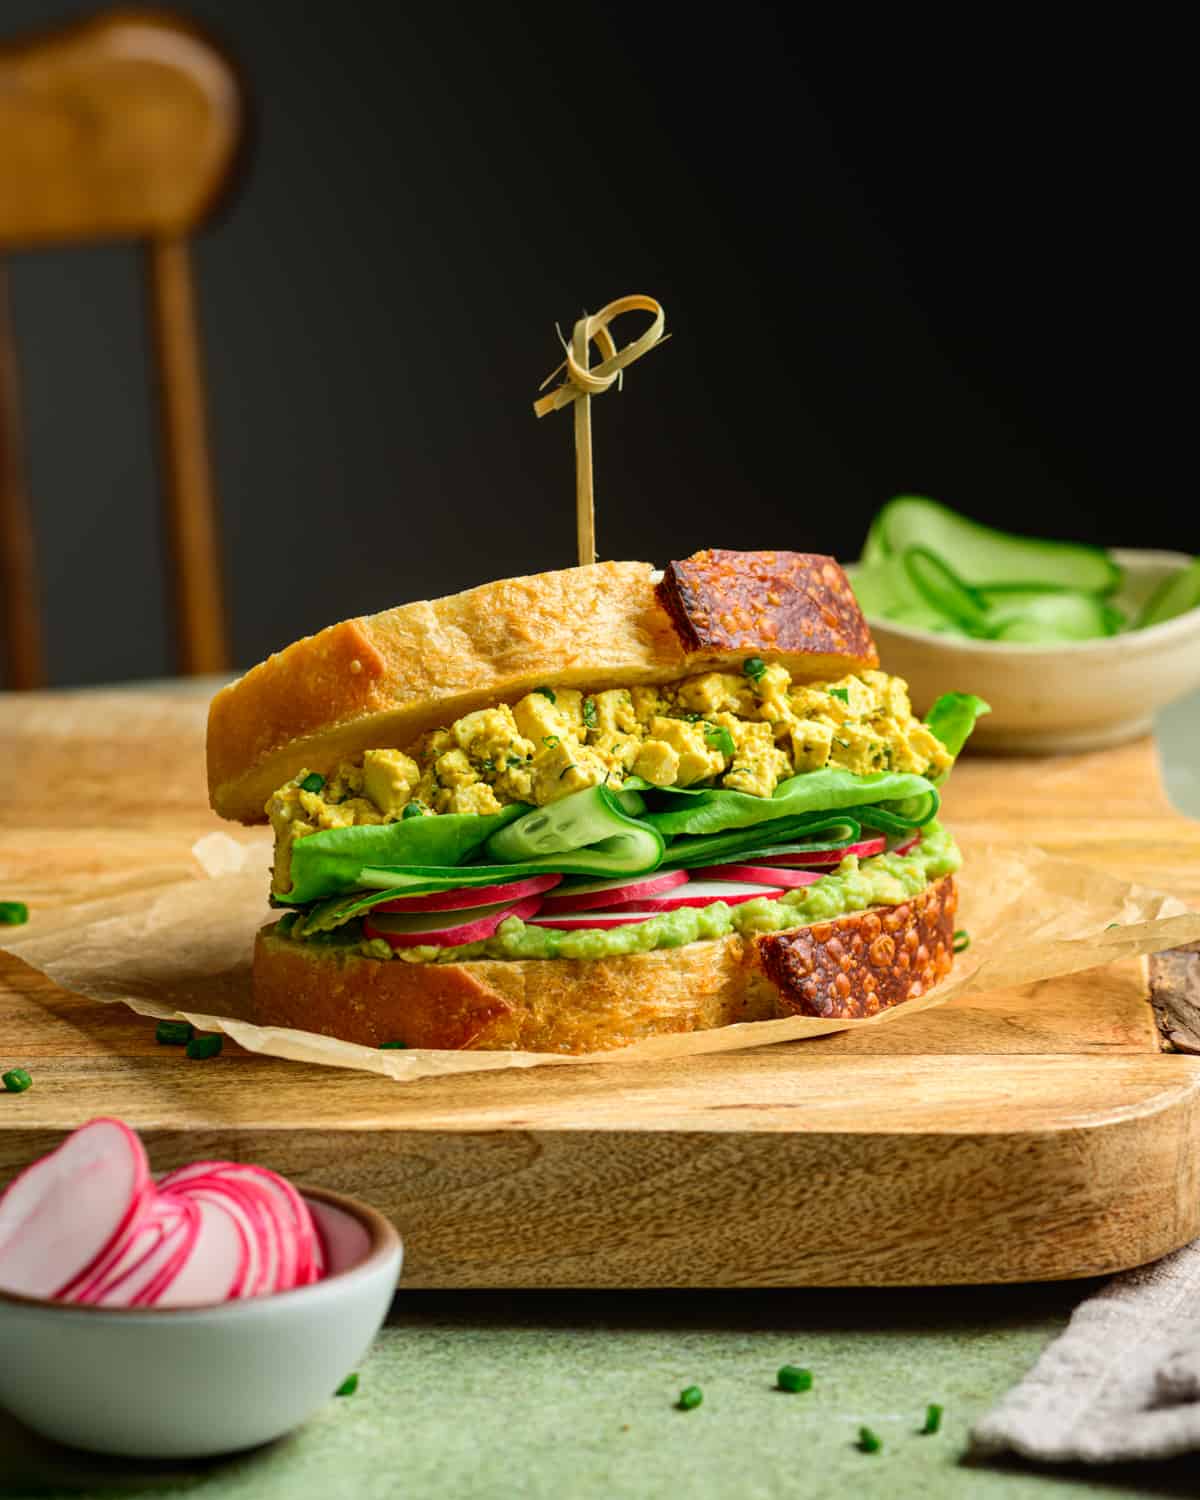 Vegan egg salad sandwich on a wooden cutting board on a table.